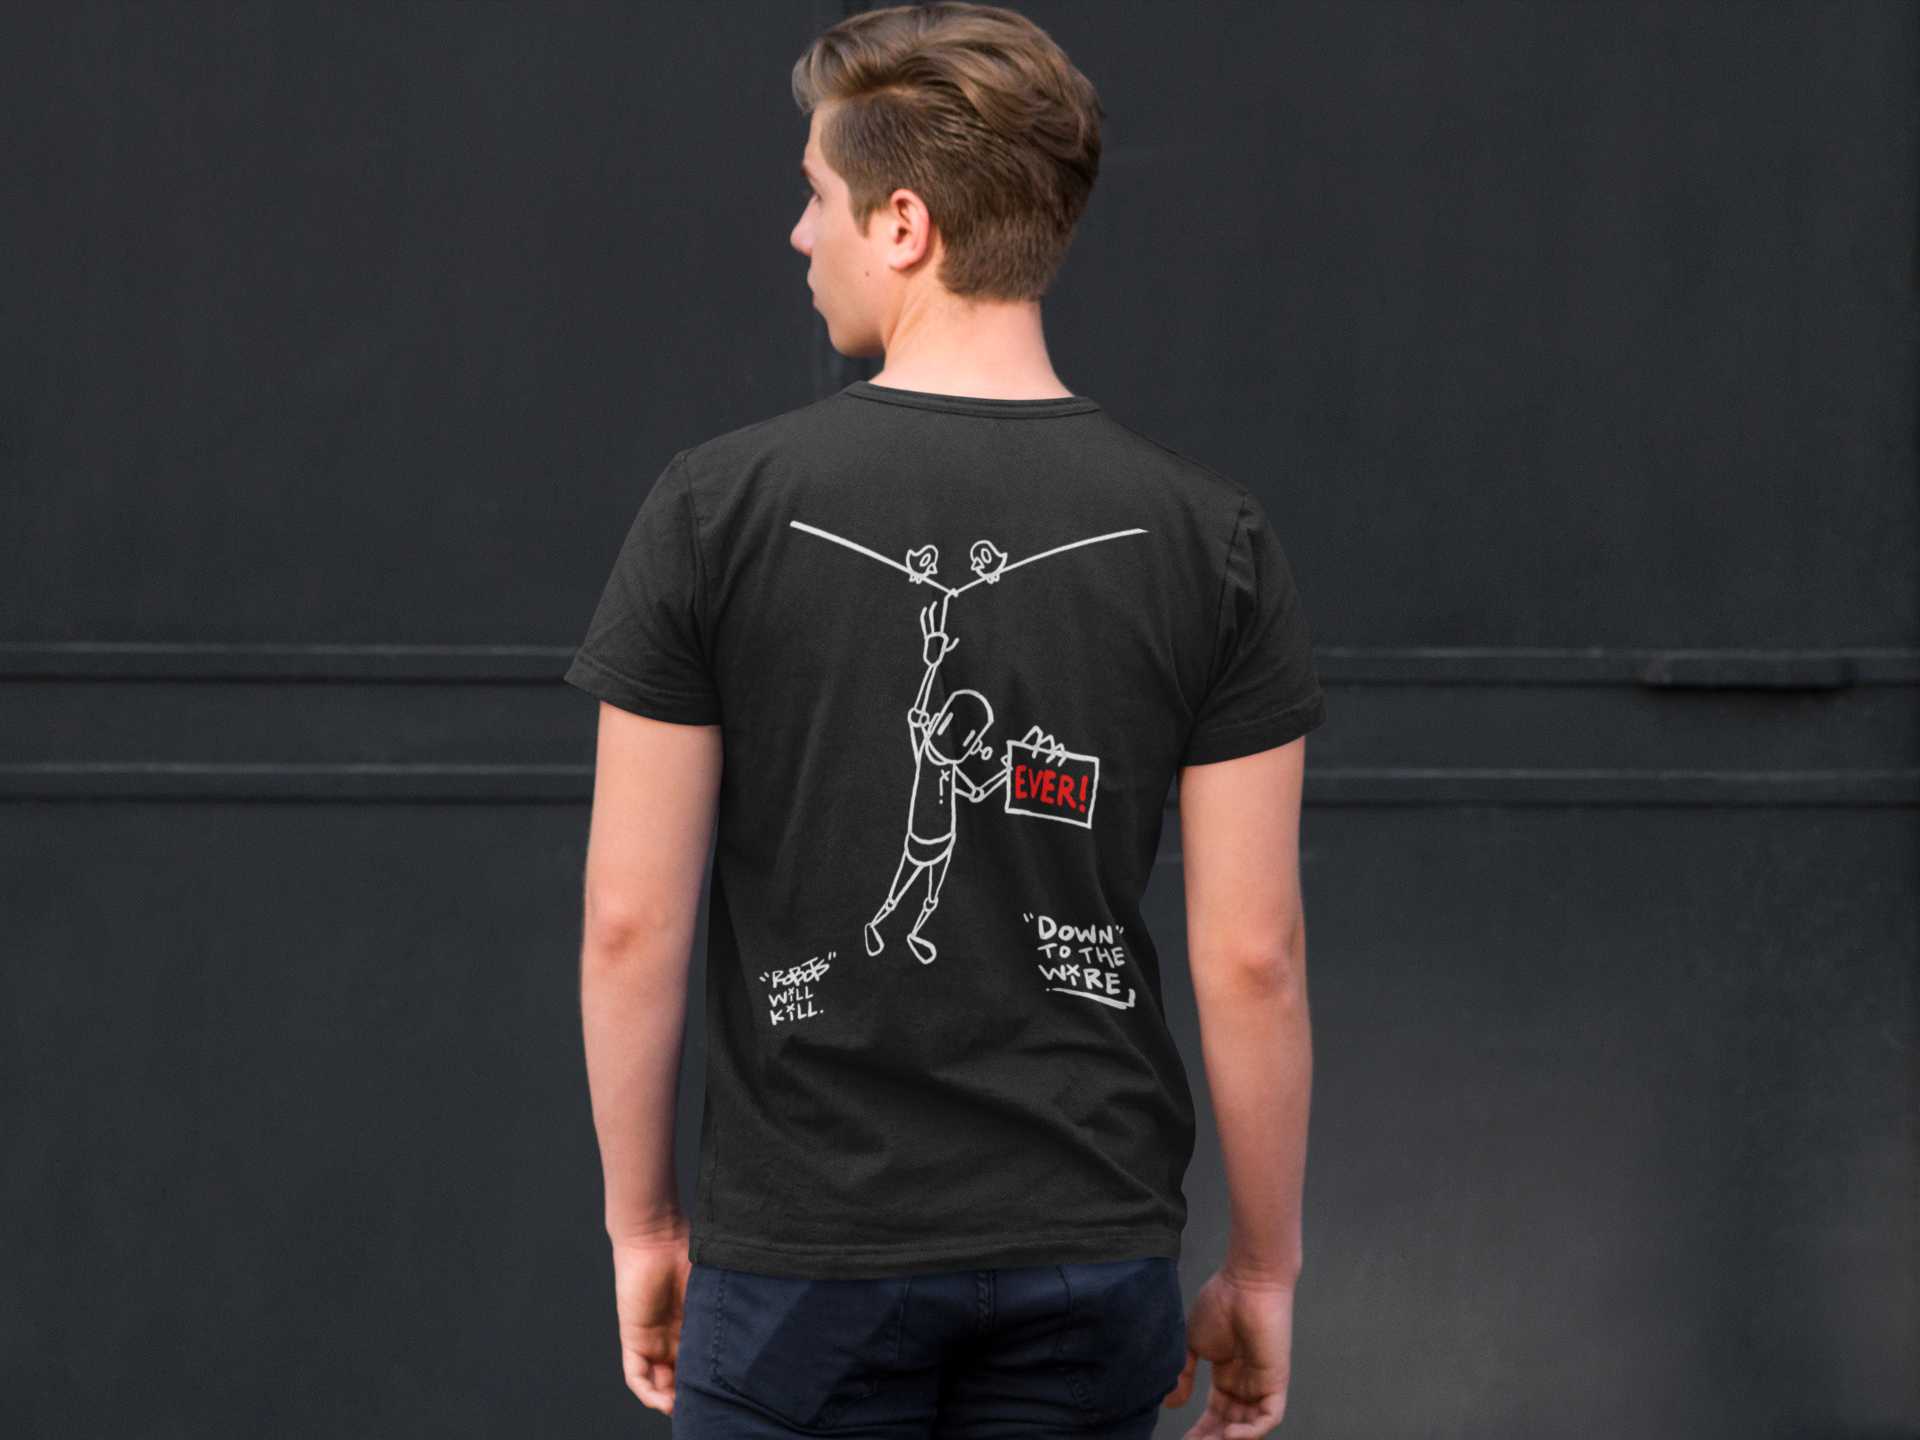 Down To The Wire Shirt by ChrisRWK